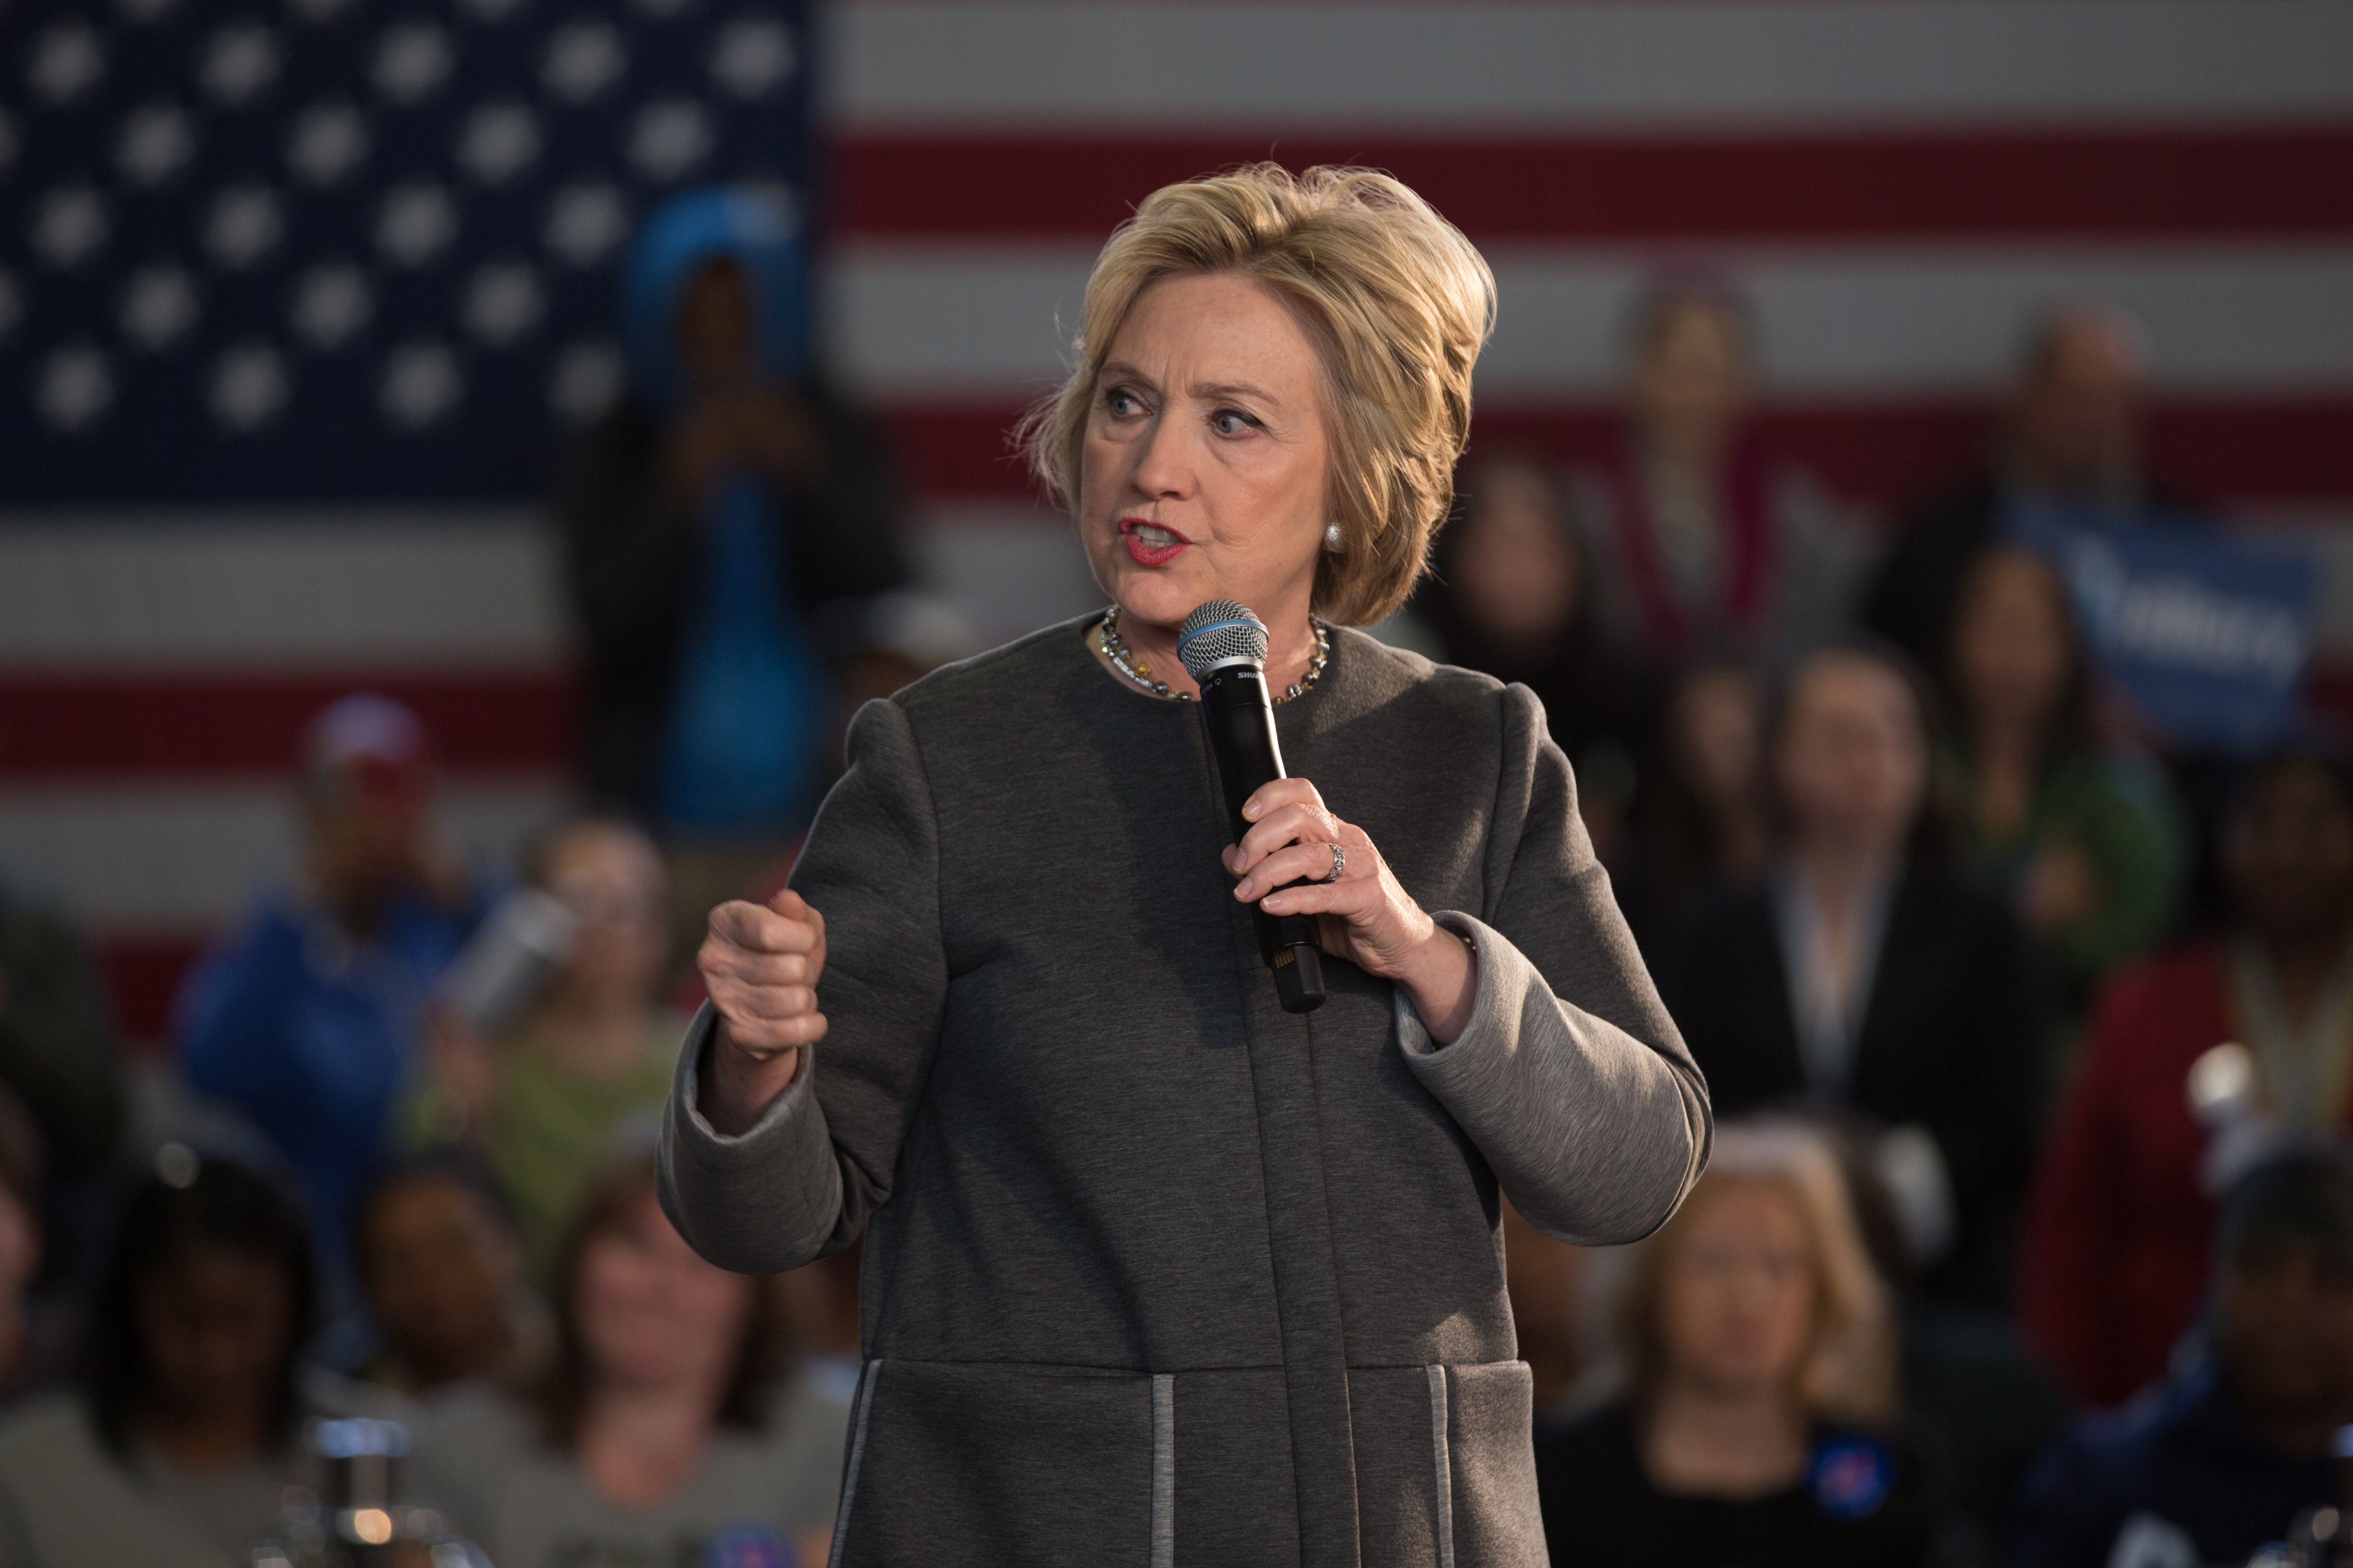 Hillary Clinton speaks at Hillary Town Hall with Congresswomen Yvette Clarke and First lady of New York City Chirlane McCray. (Louise Wateridge—Pacific Press/LightRocket/Getty Images)